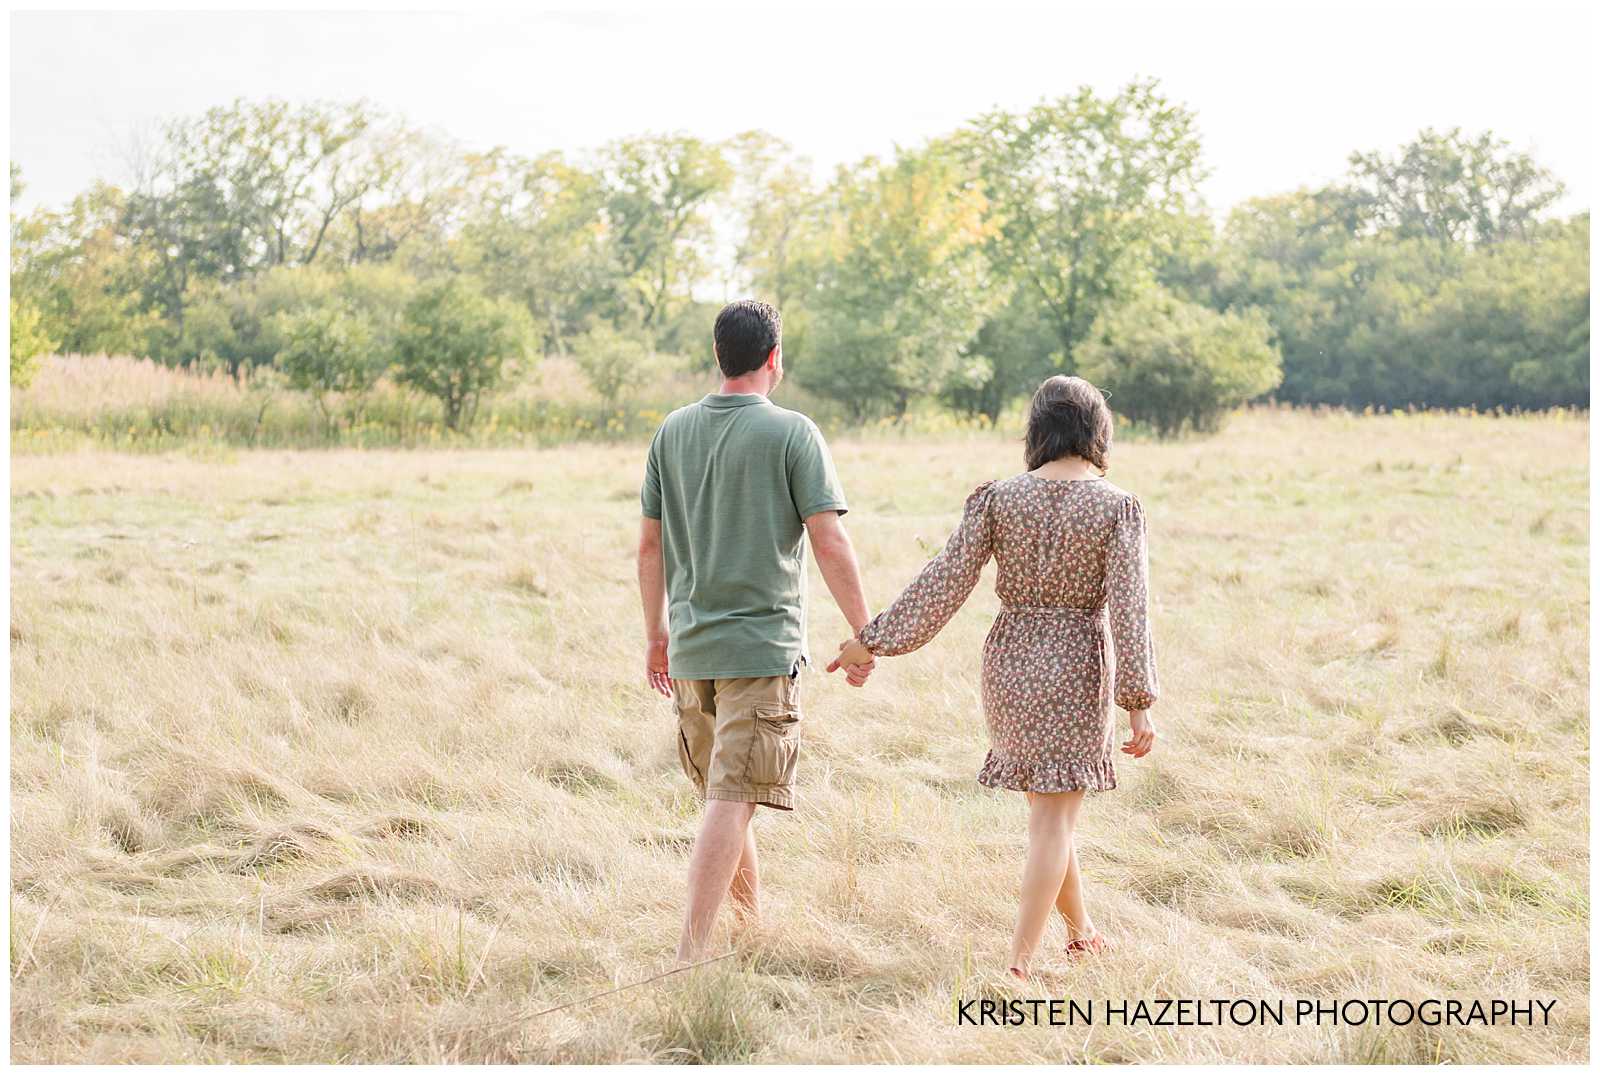 Husband and wife walking together in a field